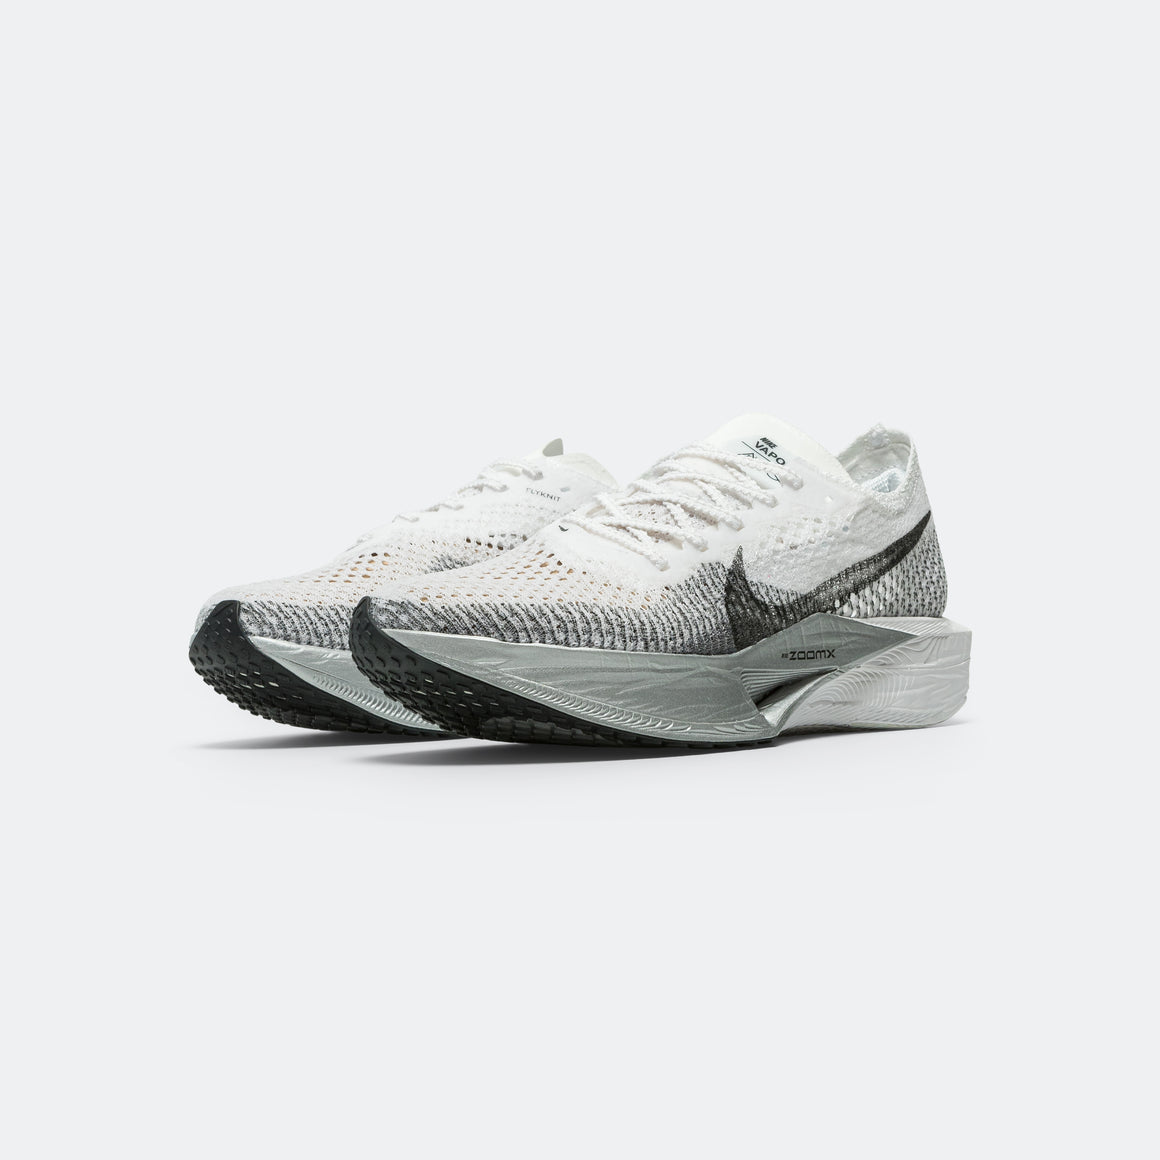 Nike - Mens ZoomX Vaporfly Next% 3 - White/Dk. Smoke Grey-Particle Grey - Up There Athletics